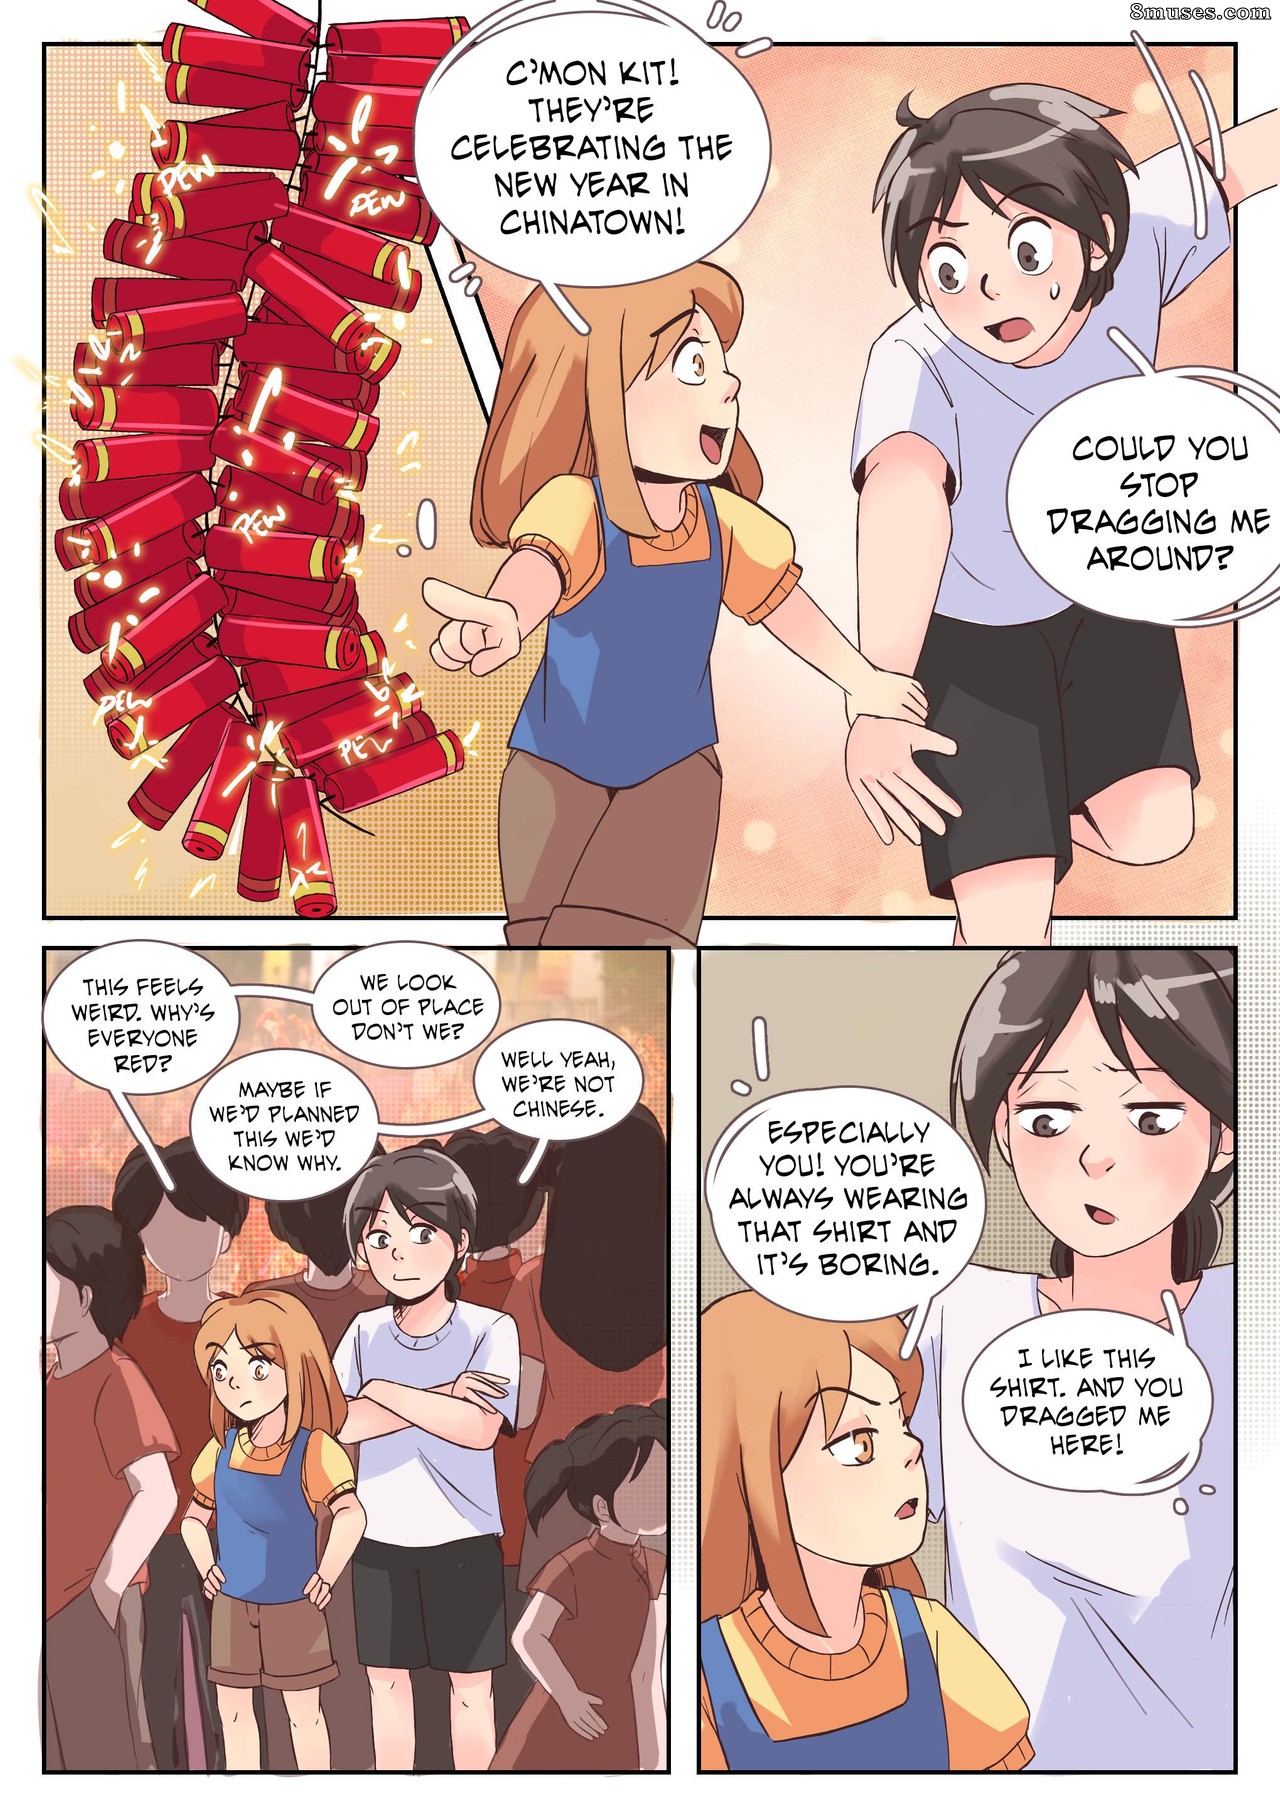 Asian Sex Books - Chinese New Year Omake Issue 1 - 8muses Comics - Sex Comics and Porn  Cartoons